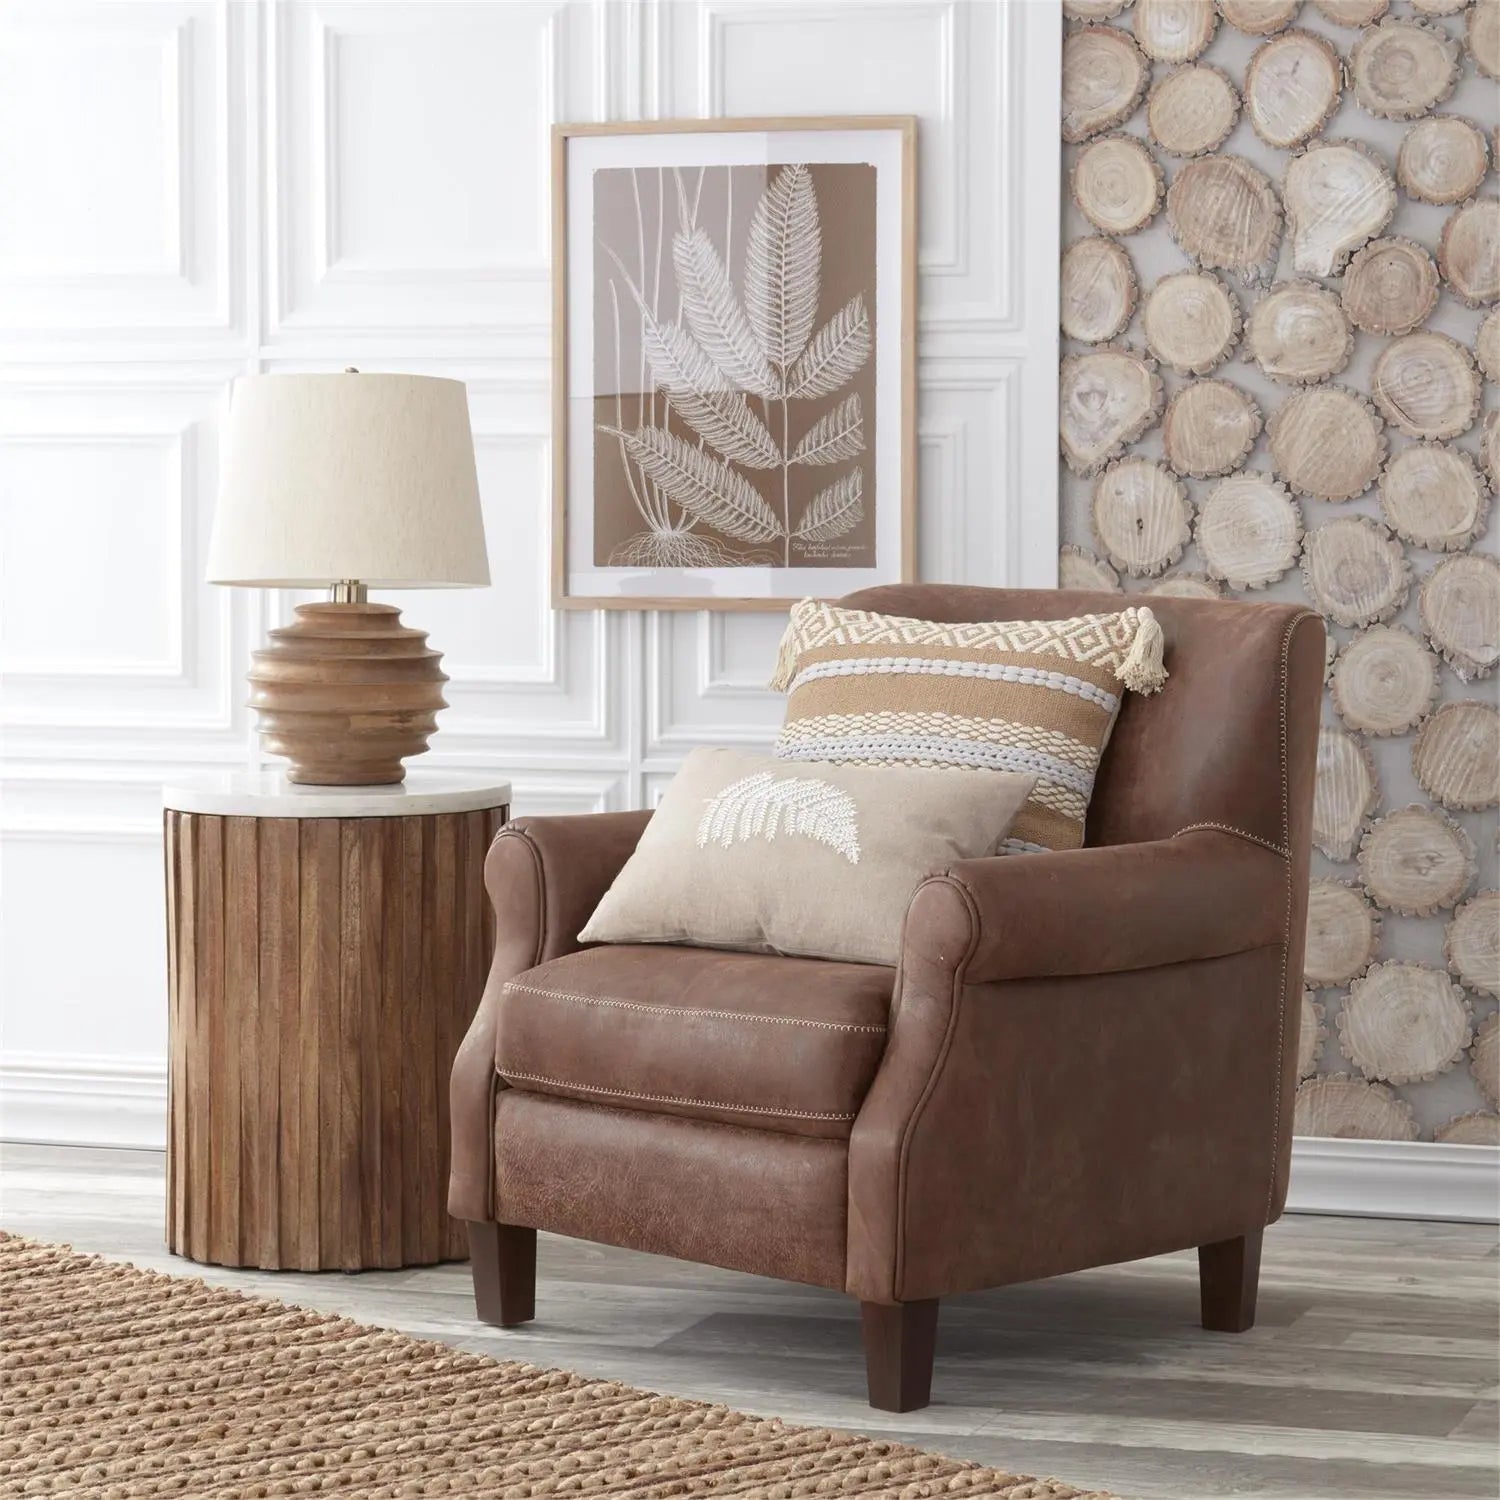 K and K Interiors Mango Wood Ribbed Round Lamp with Shade on a natural wood end table by a brown leather chair with a picture on the wall.